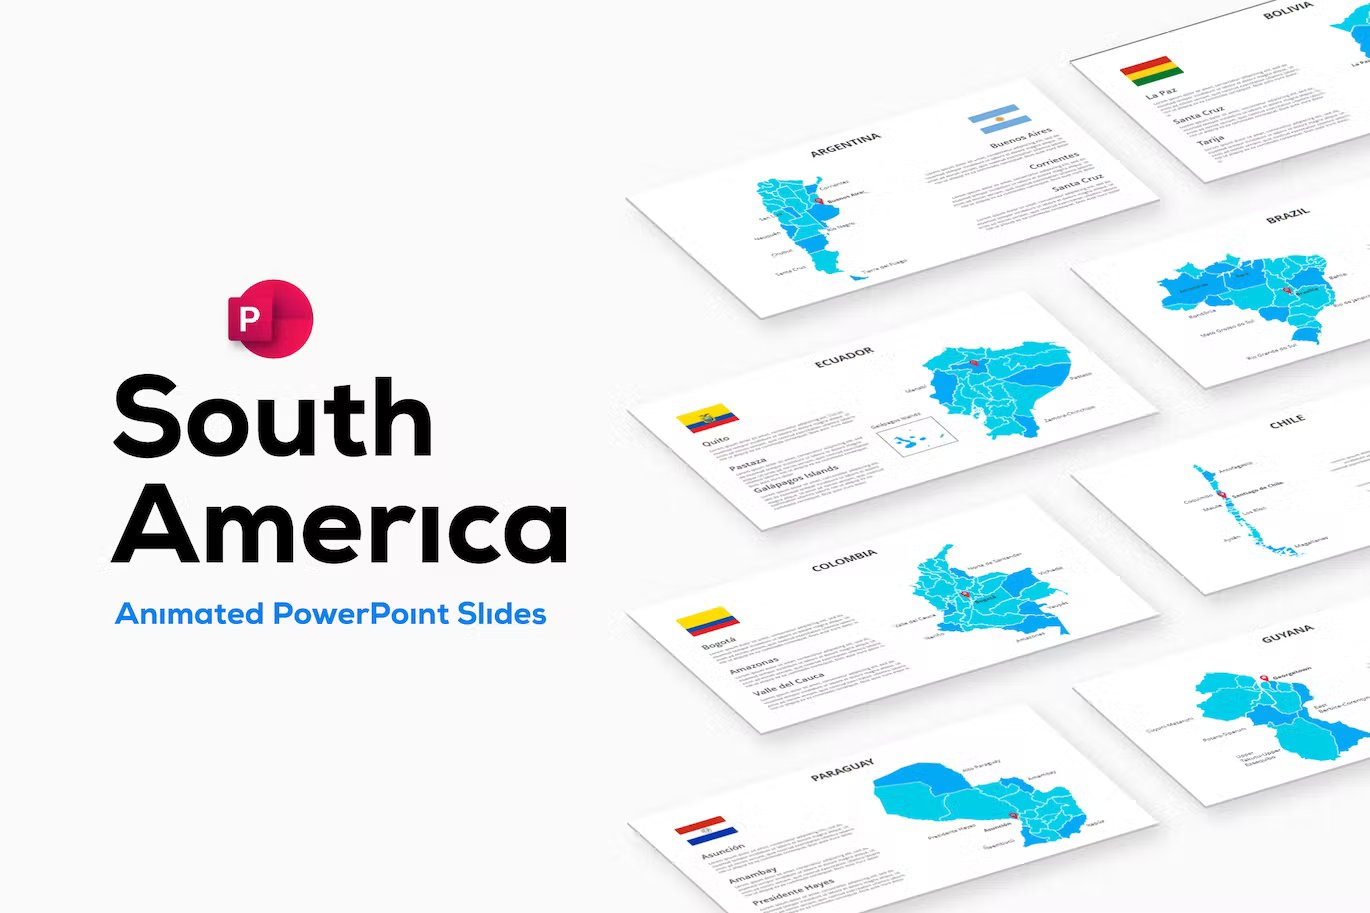 Black and blue lettering "South America Animated PowerPoint Slides" and different presentation templates on a gray background.